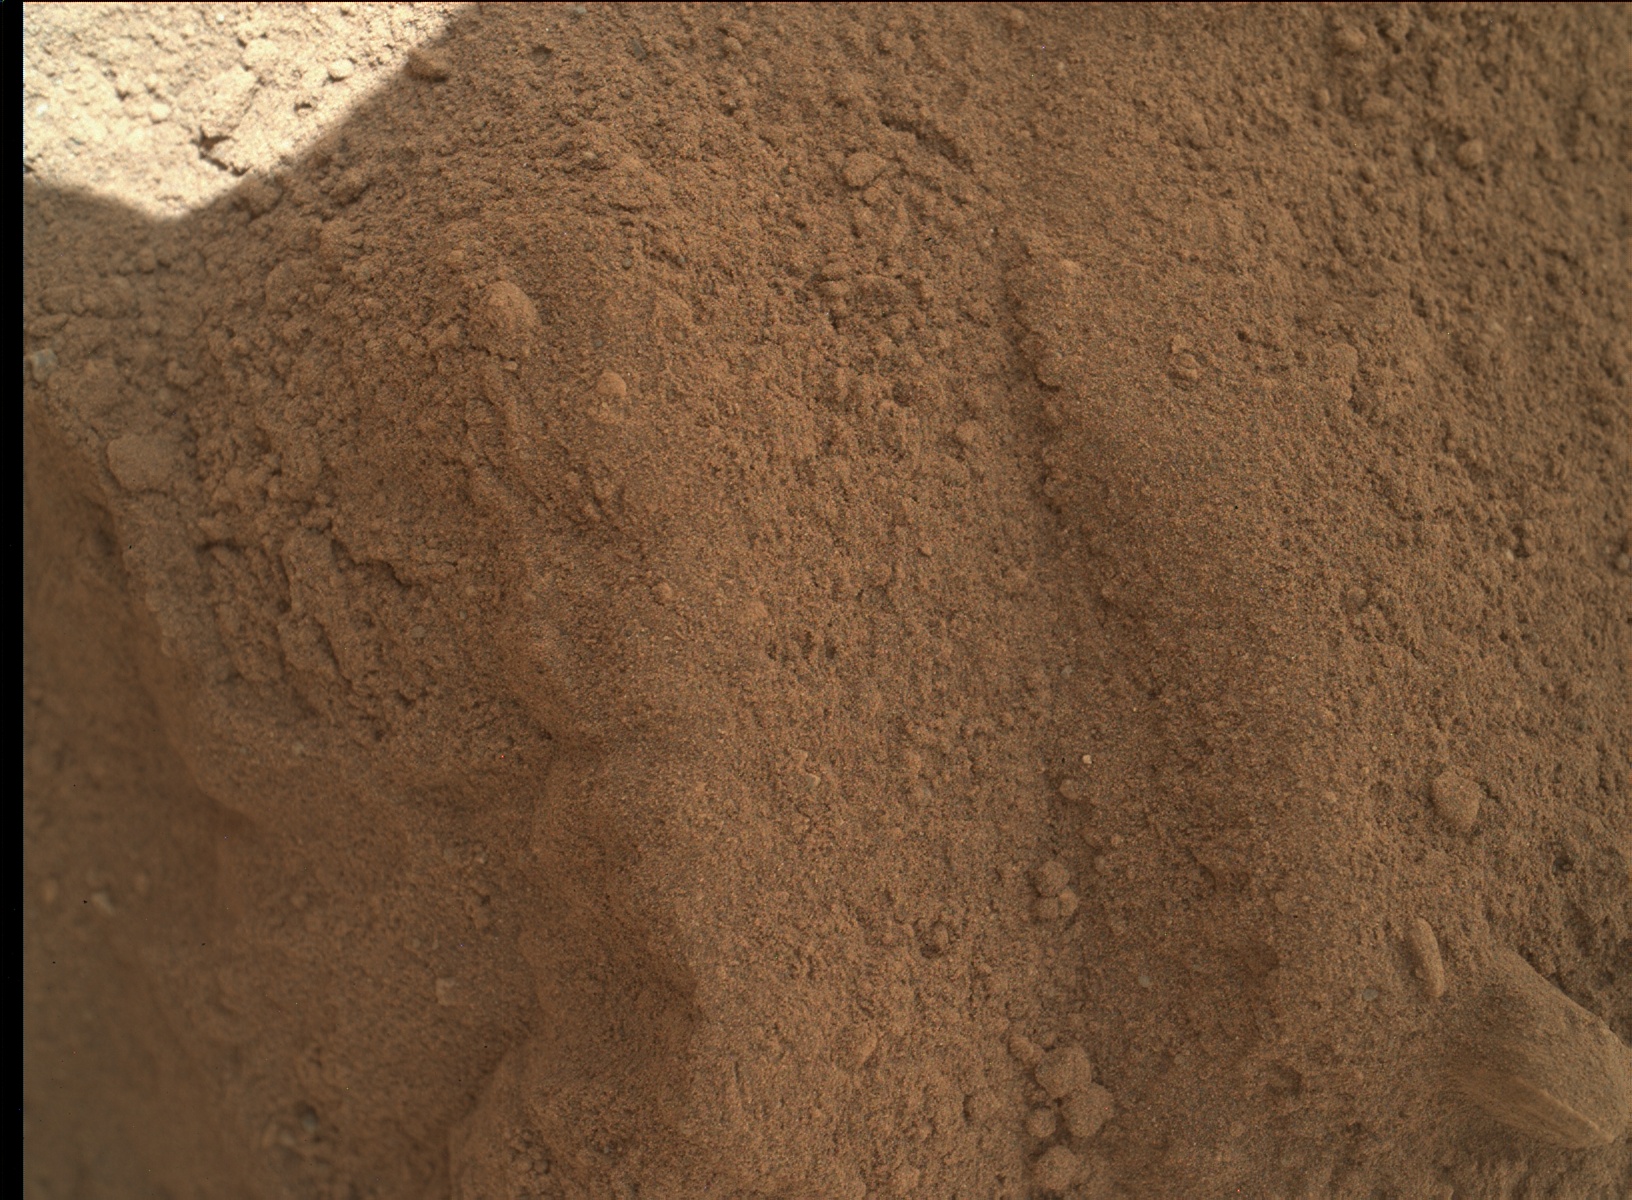 Nasa's Mars rover Curiosity acquired this image using its Mars Hand Lens Imager (MAHLI) on Sol 673